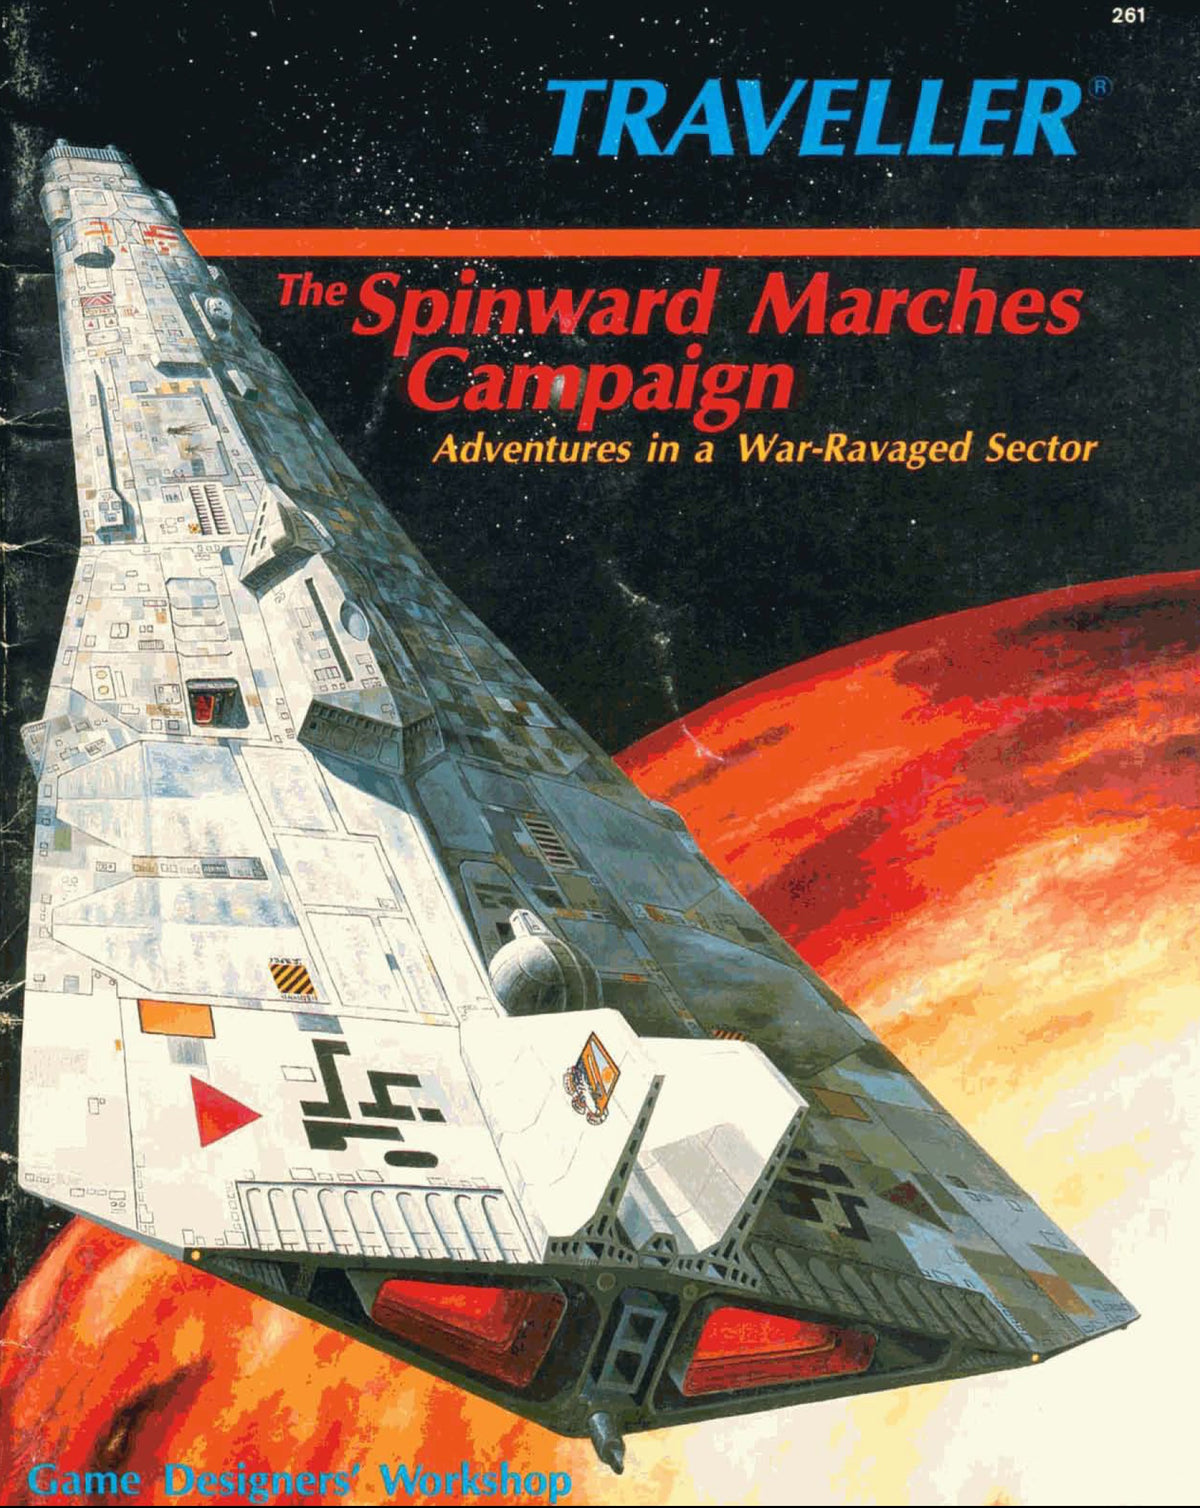 The Spinward Marches Campaign ebook